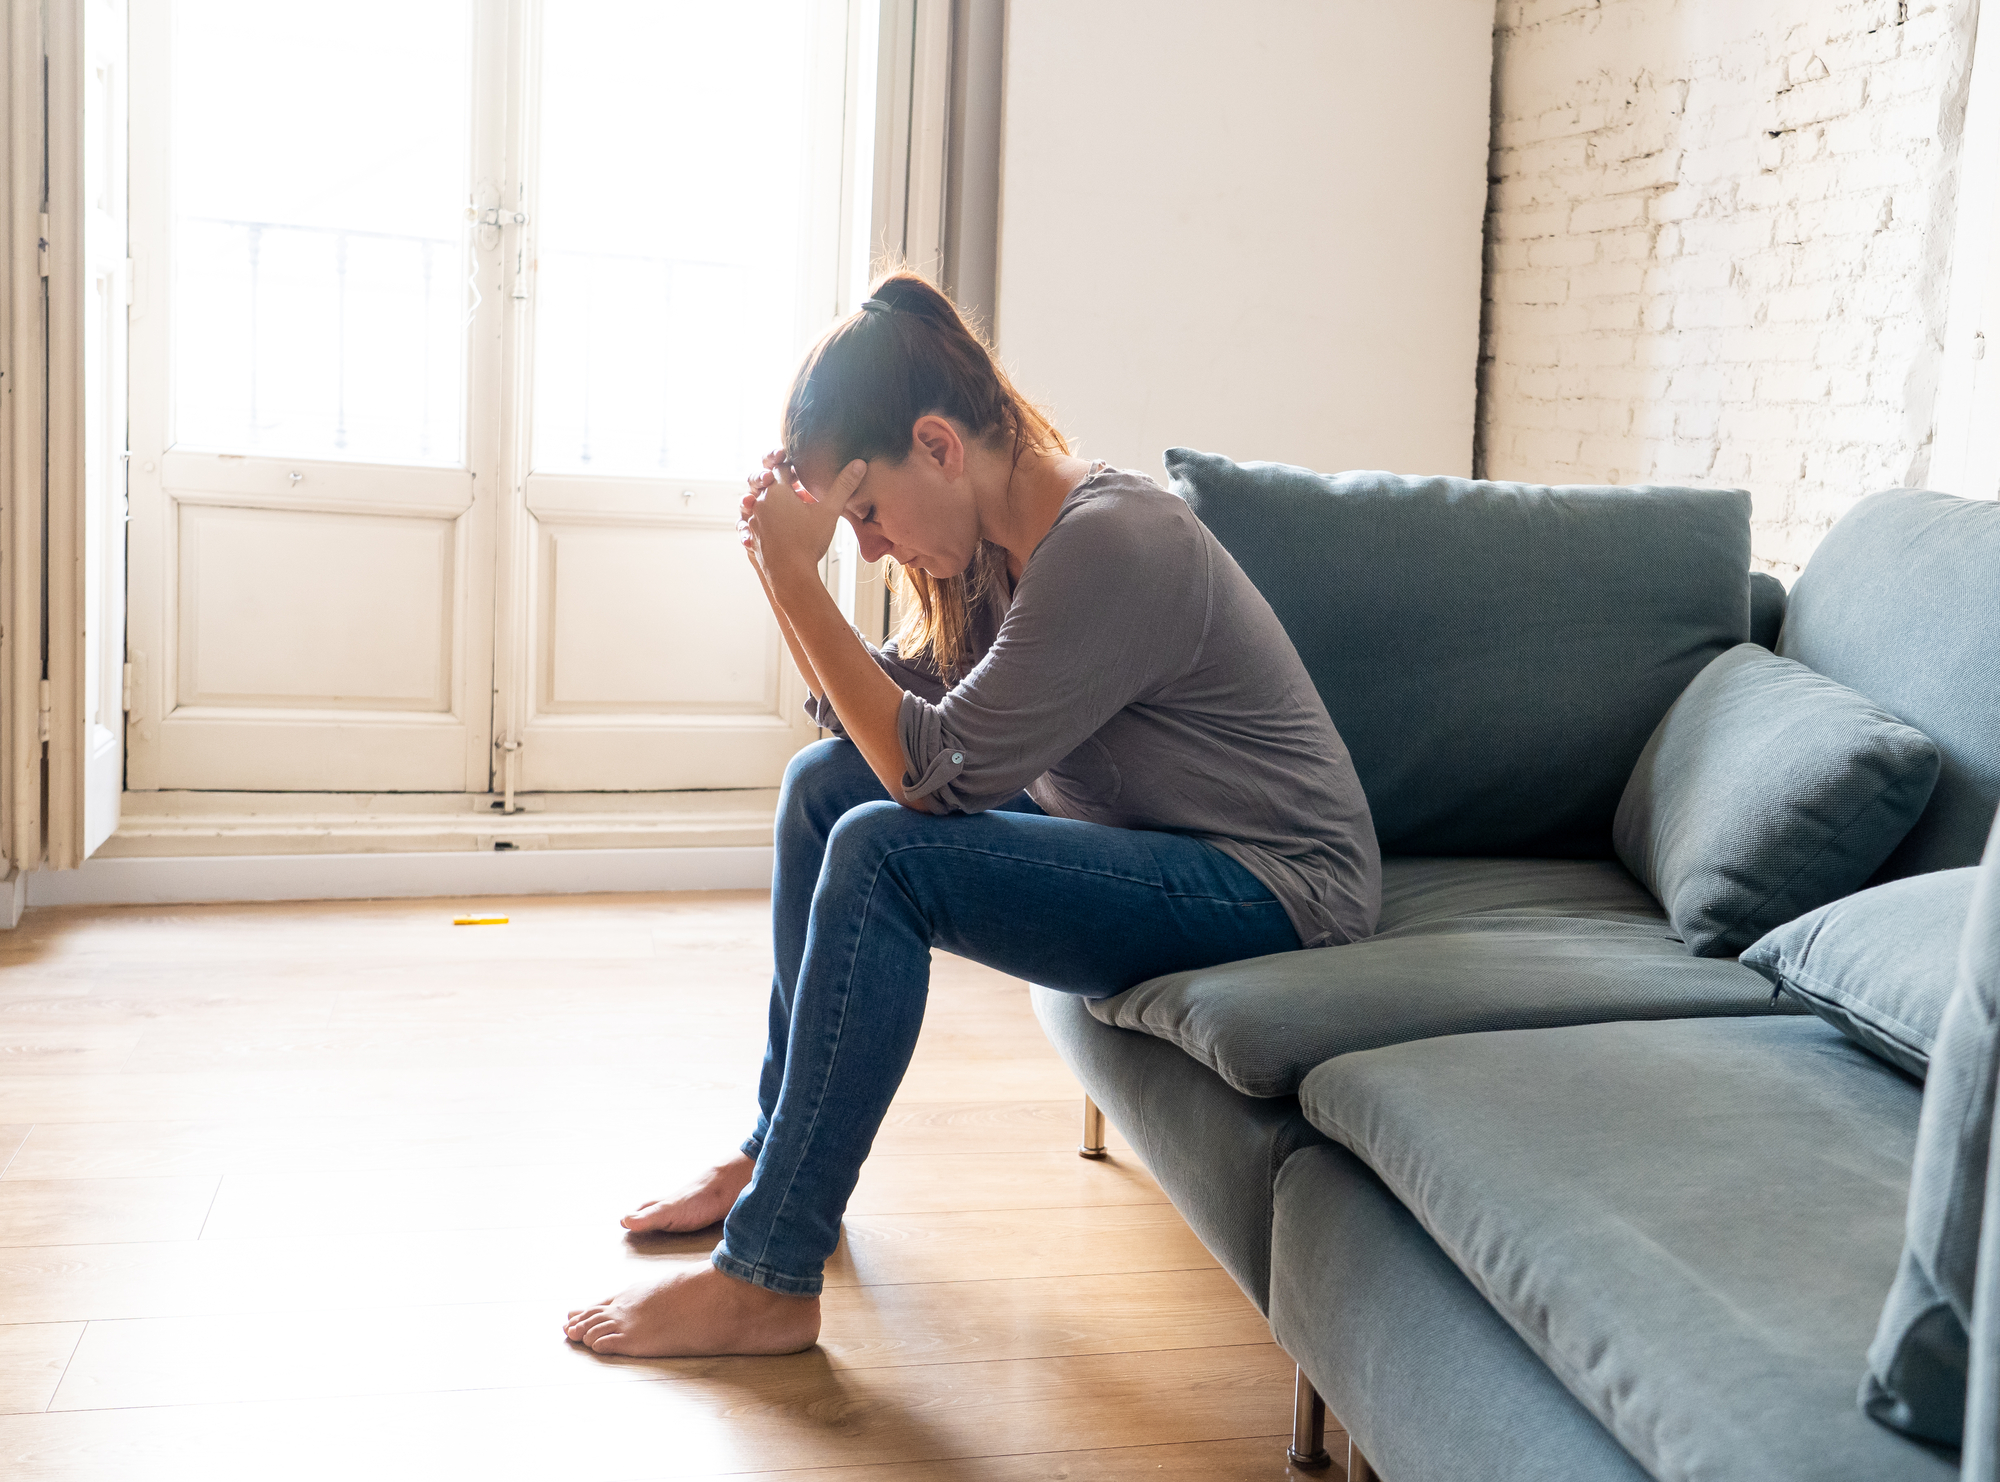 Filing A Claim For Emotional Distress - Young woman suffering from depression